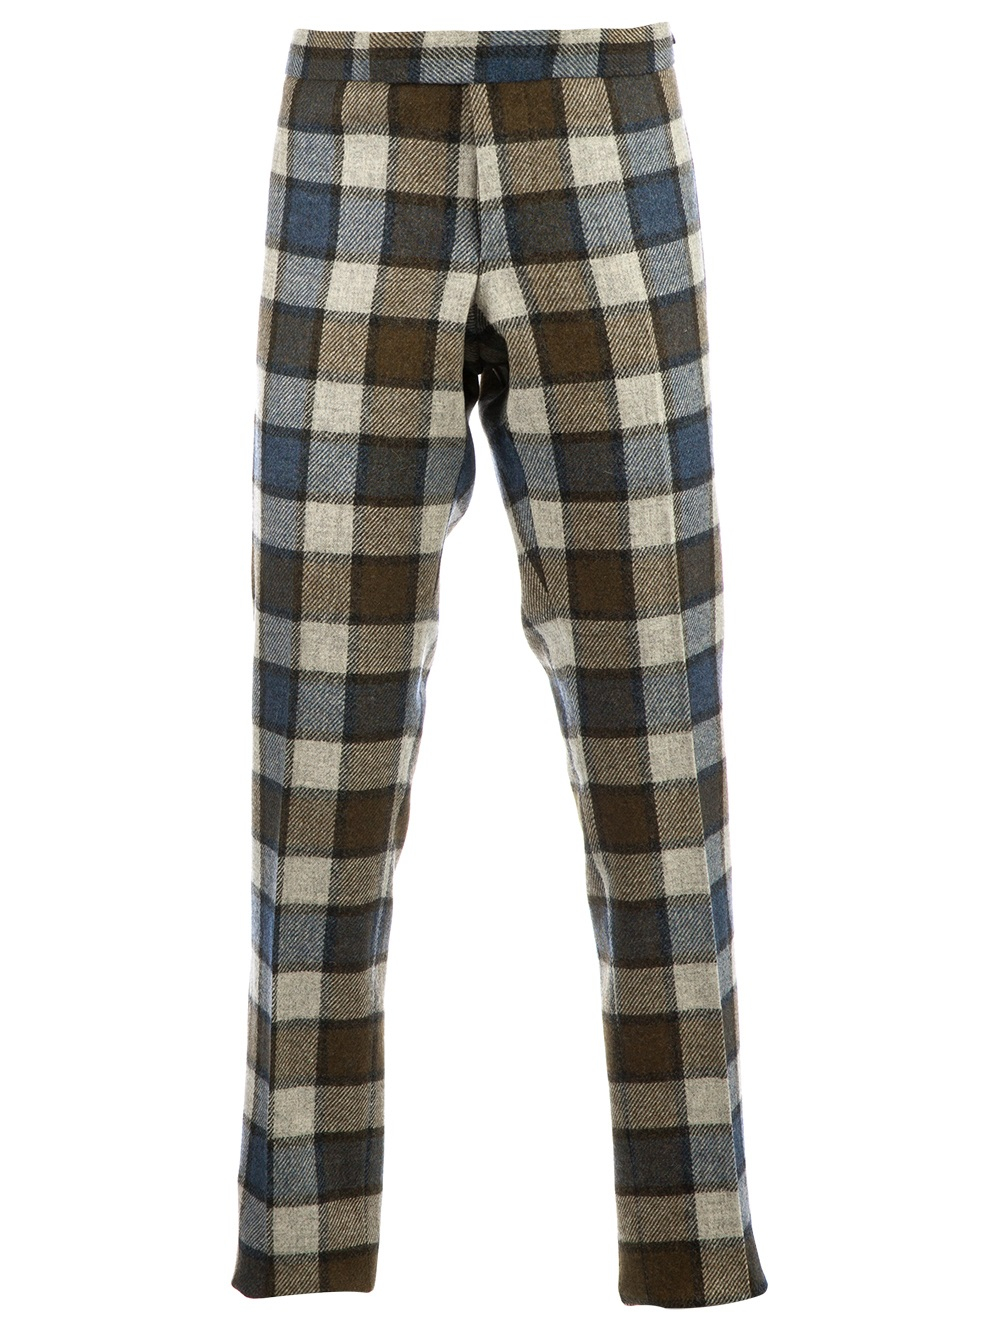 Lyst - Thom Browne Checked Trouser in Green for Men